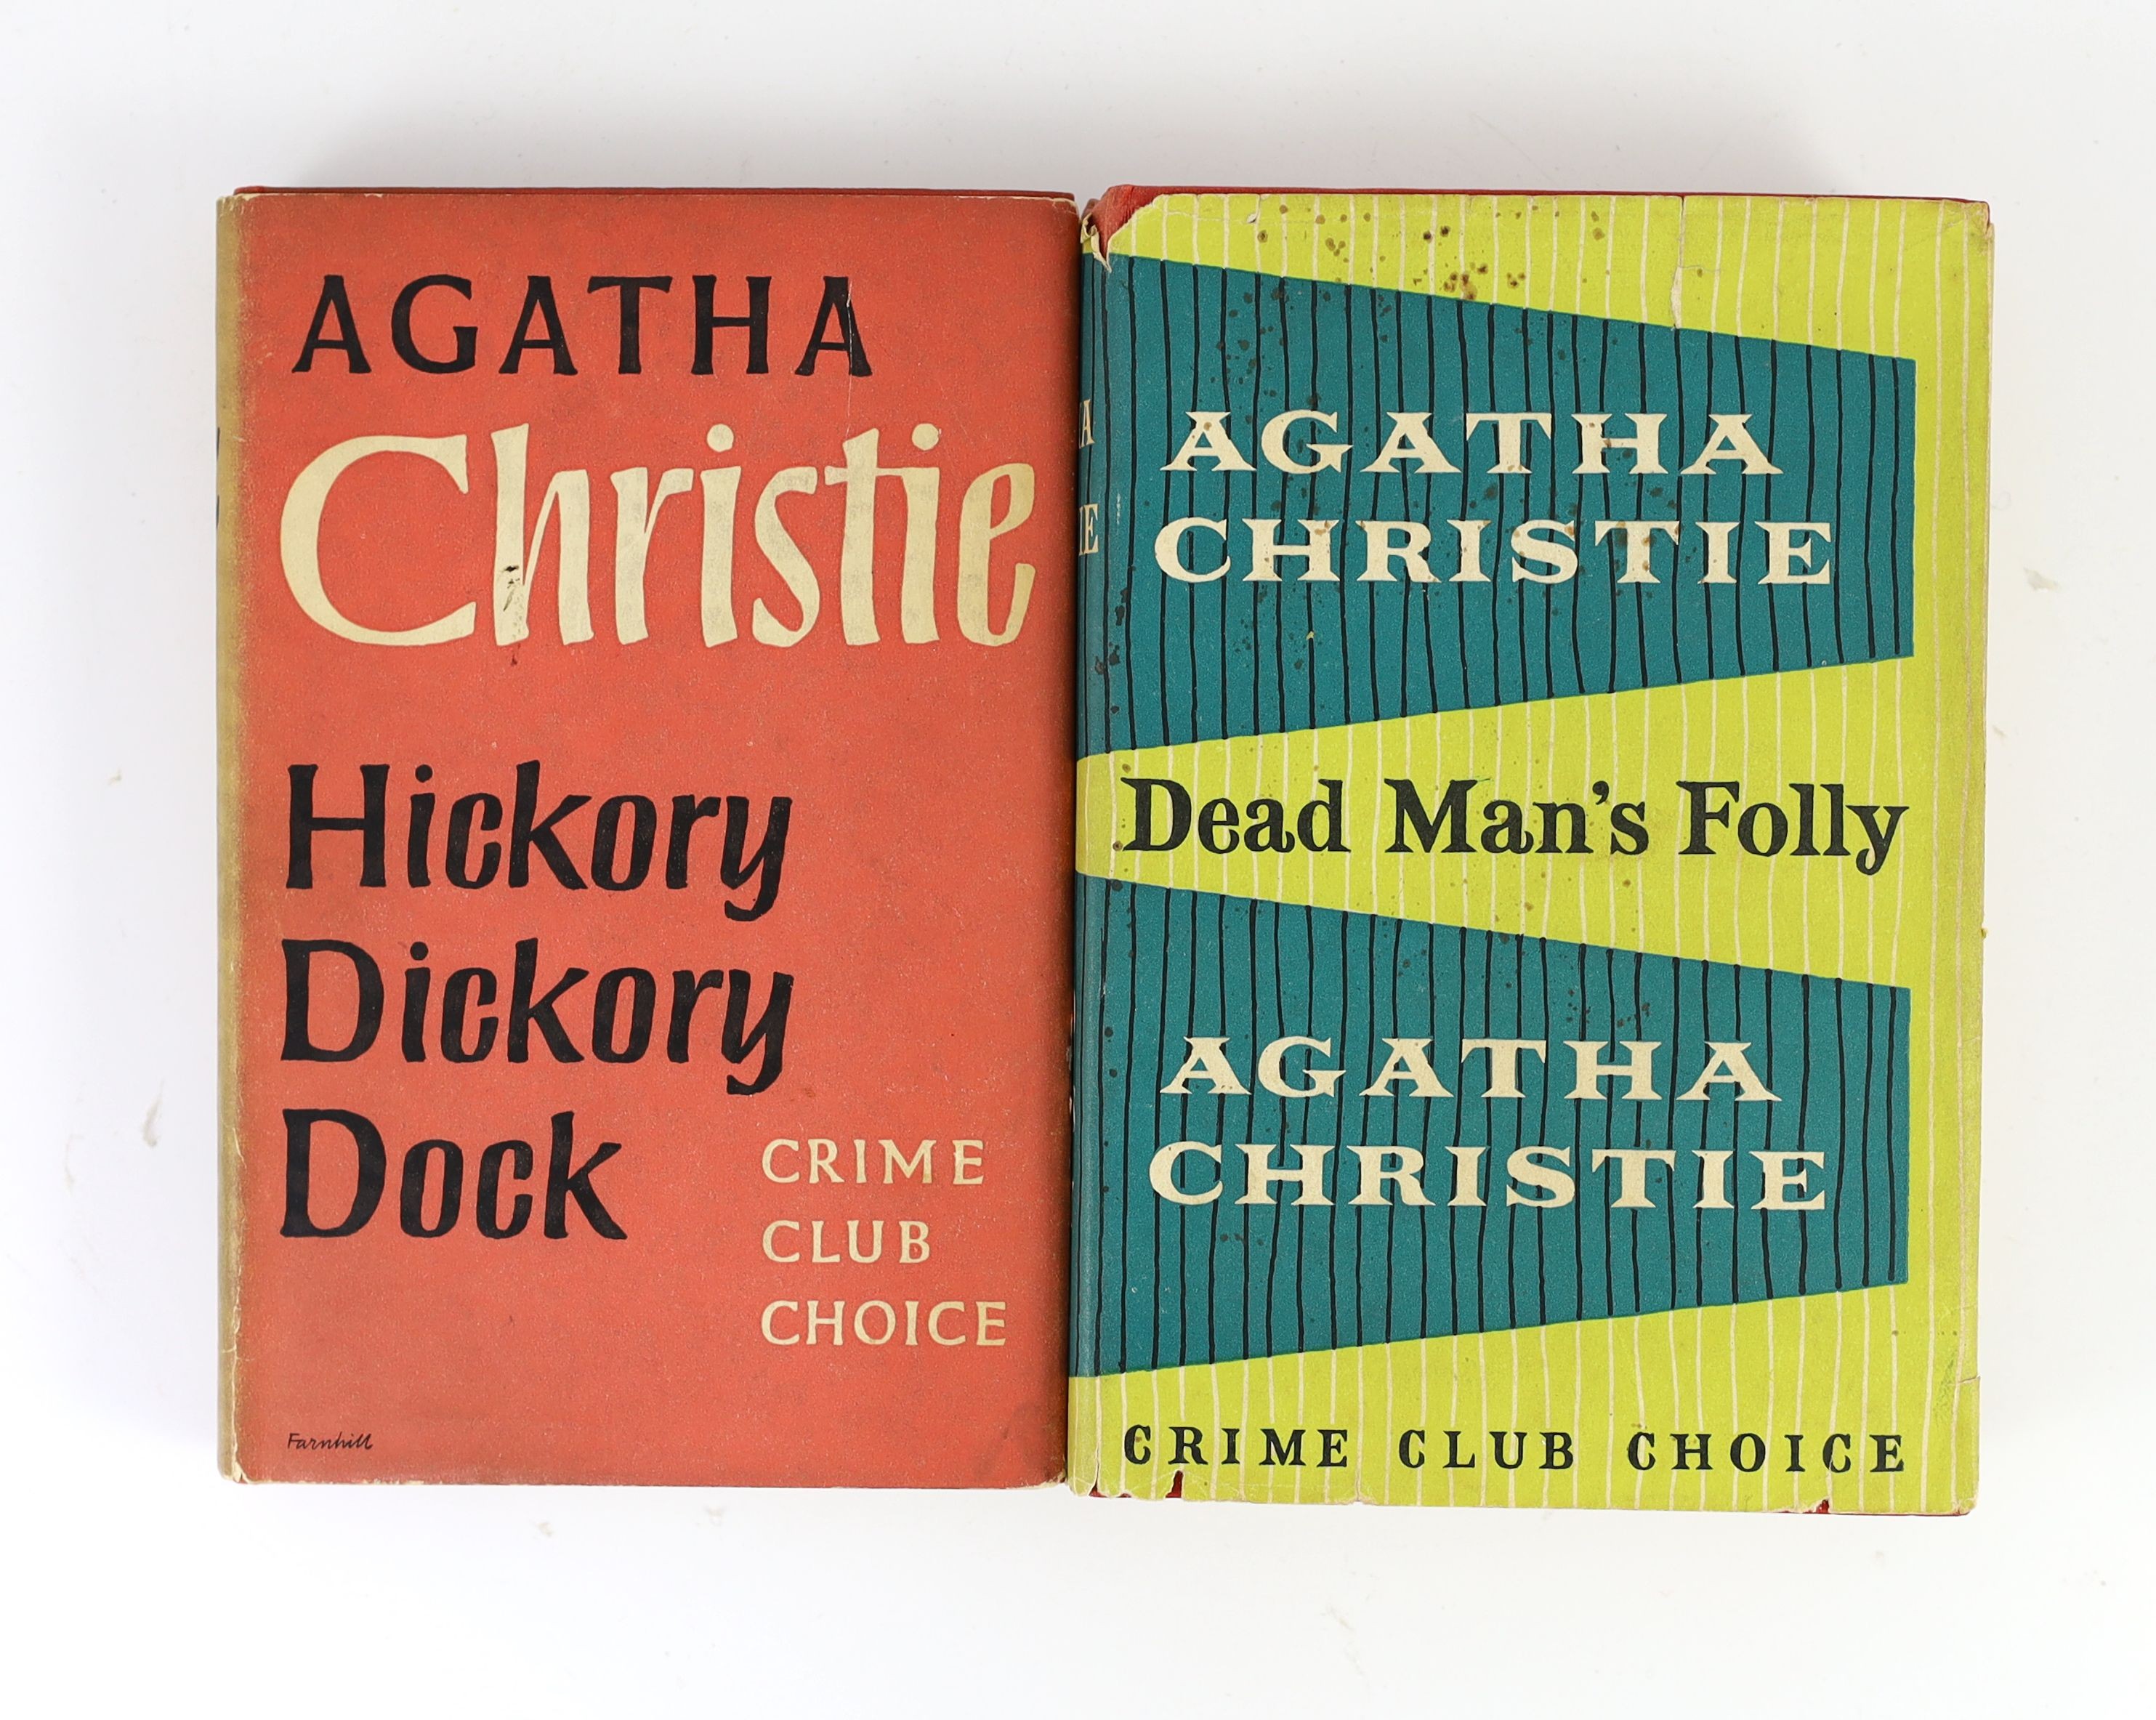 Christie, Agatha - Two works - Hickory Dickory Dock, 1st edition